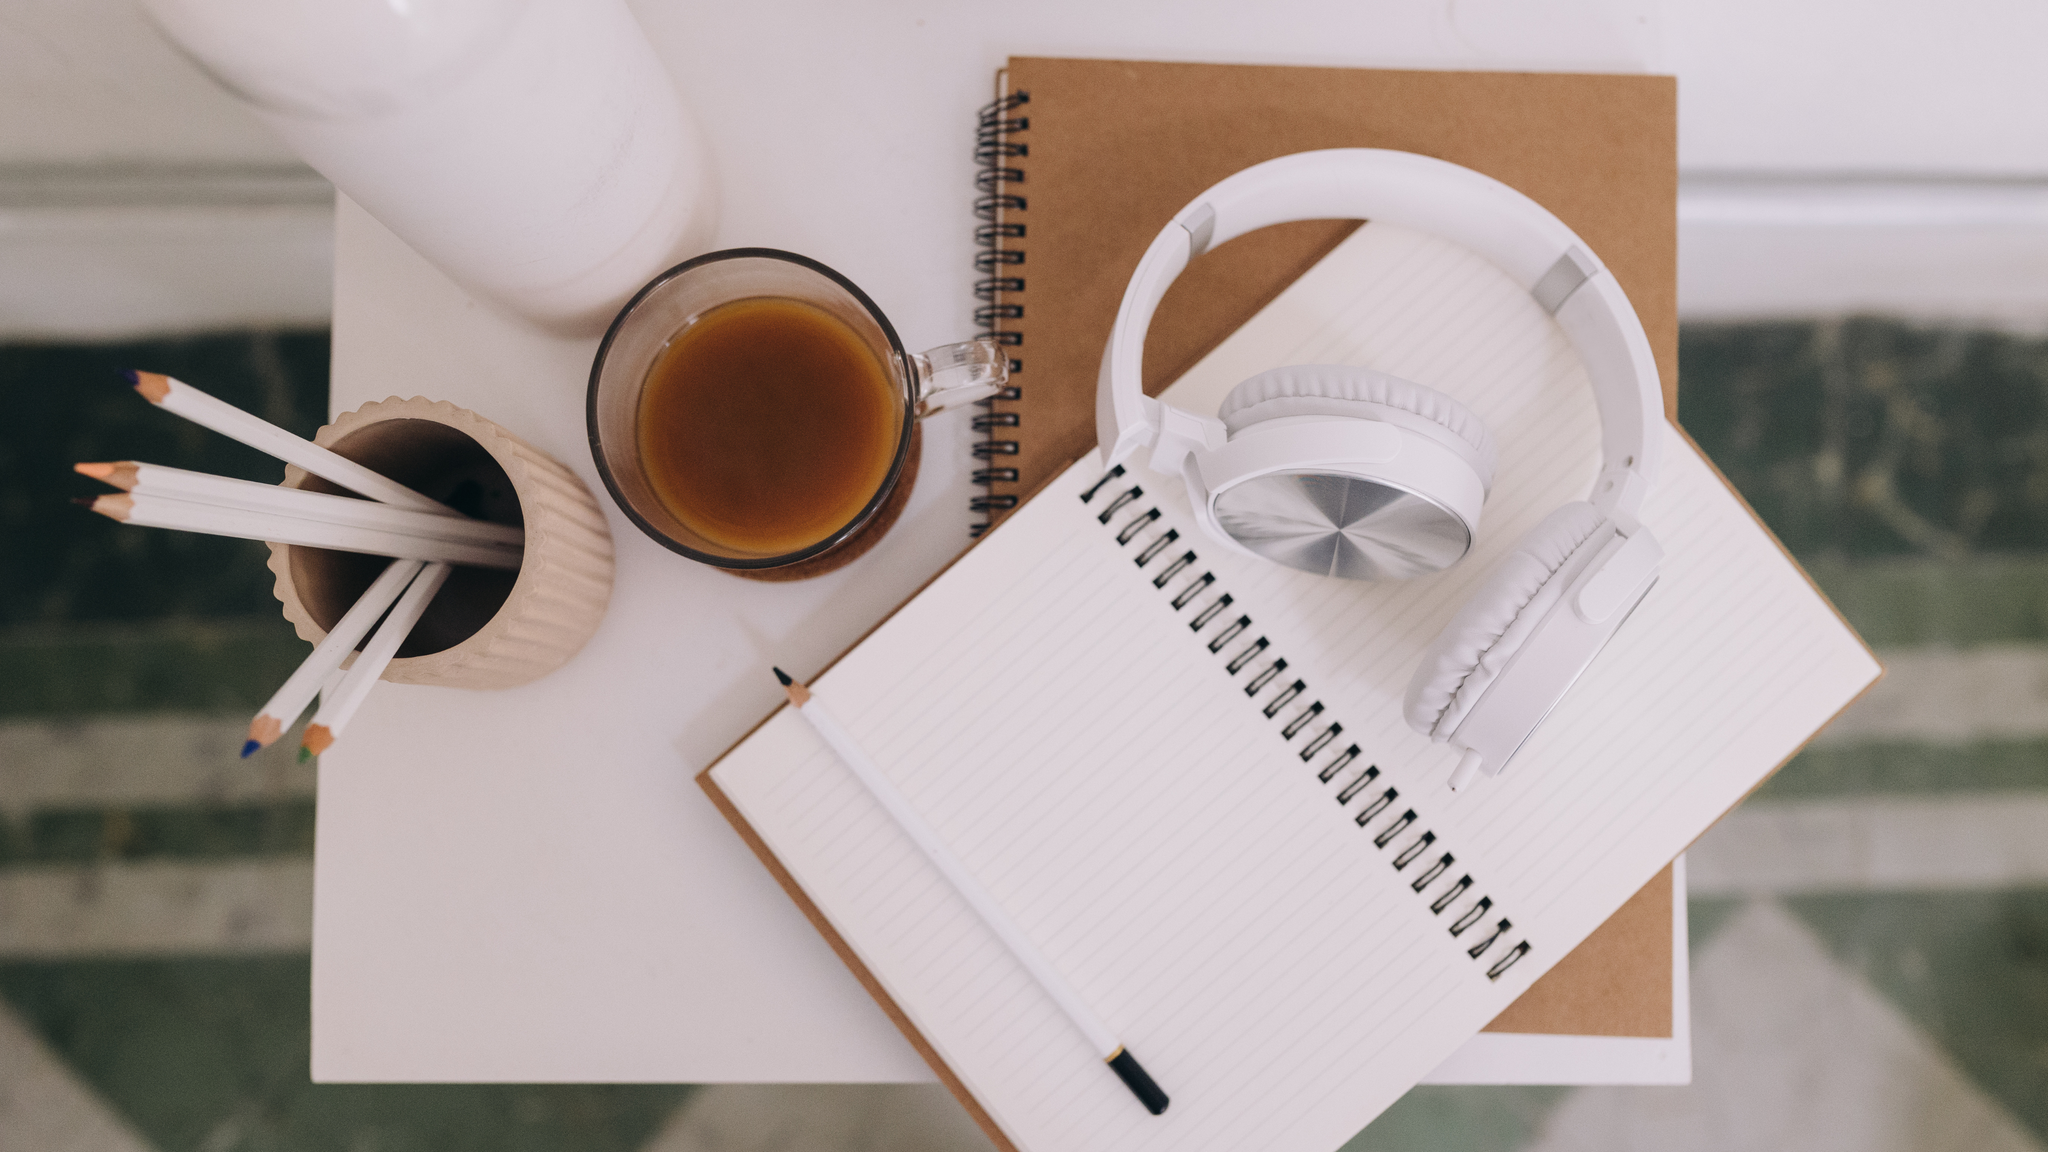 Top down view of an open notebook, headphones, a pencil cup and a coffee cup